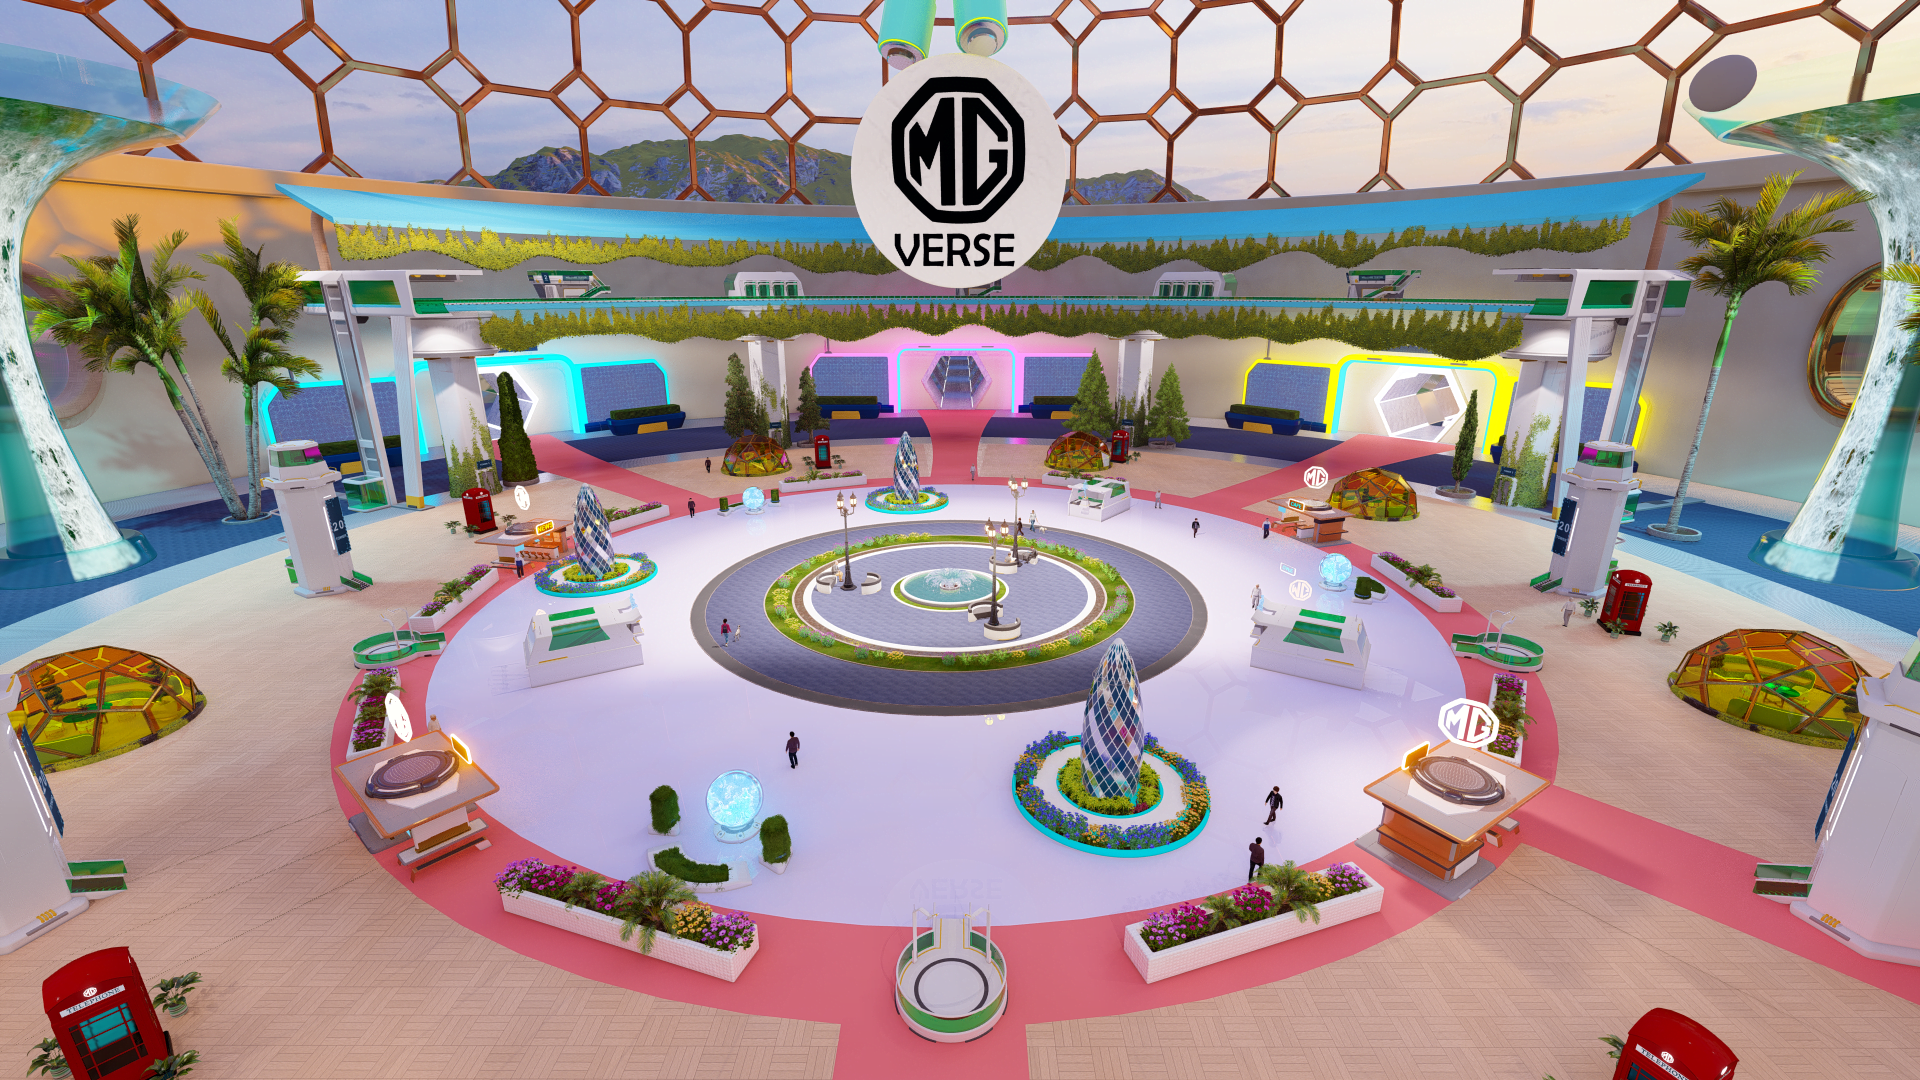 MG Launches MGVerse - Meta Verse Platform For Immersive Virtual Experience